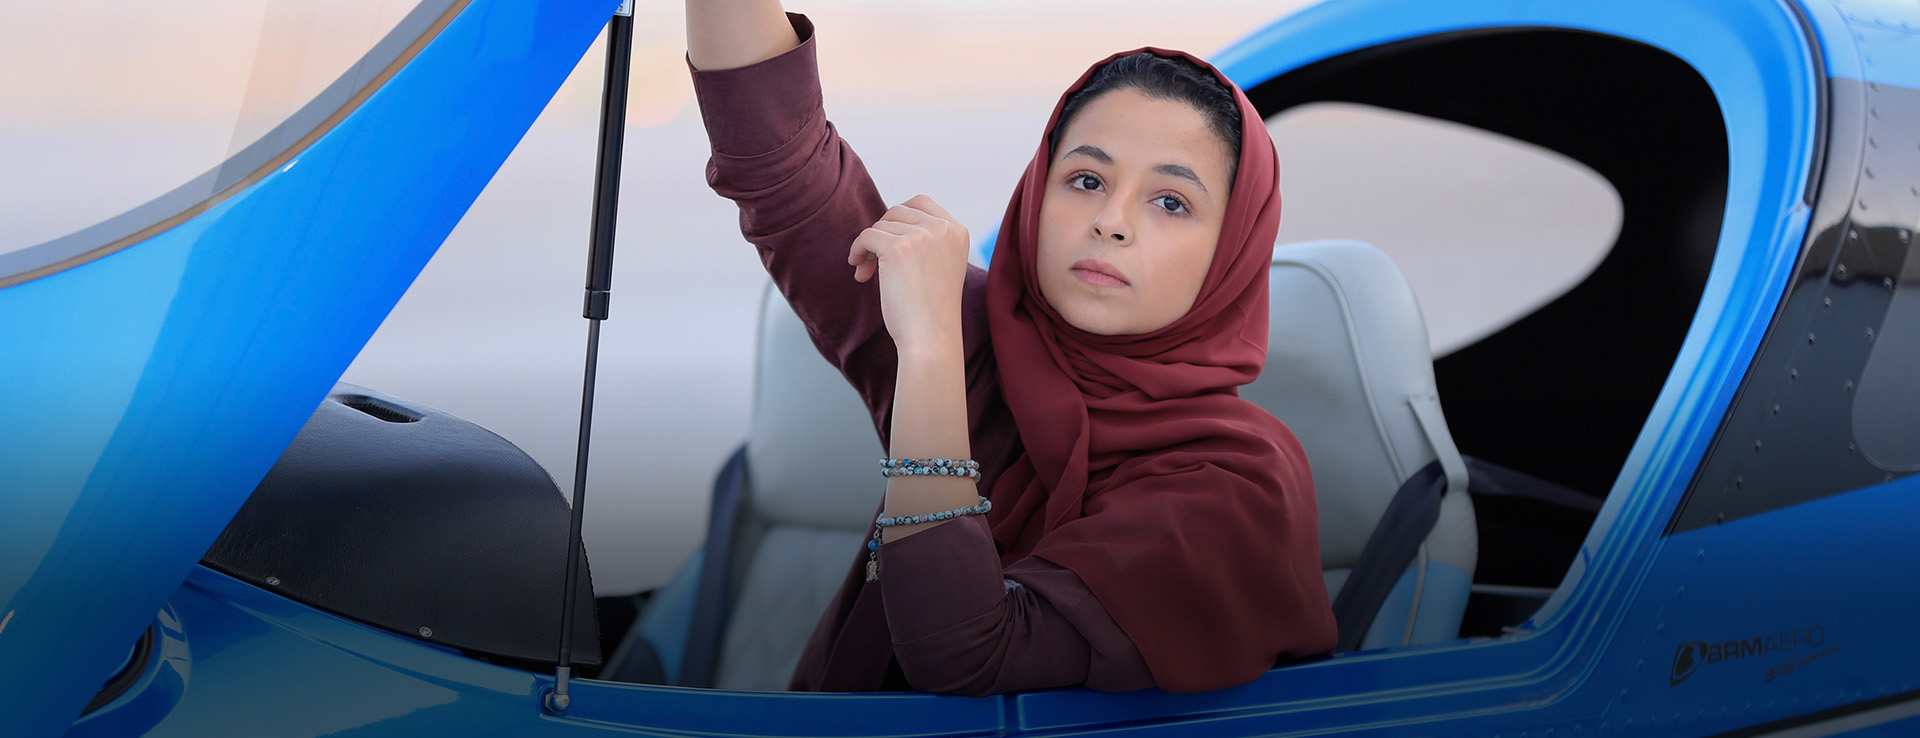 Woman in hijab sat in light aircraft, lifting its canopy